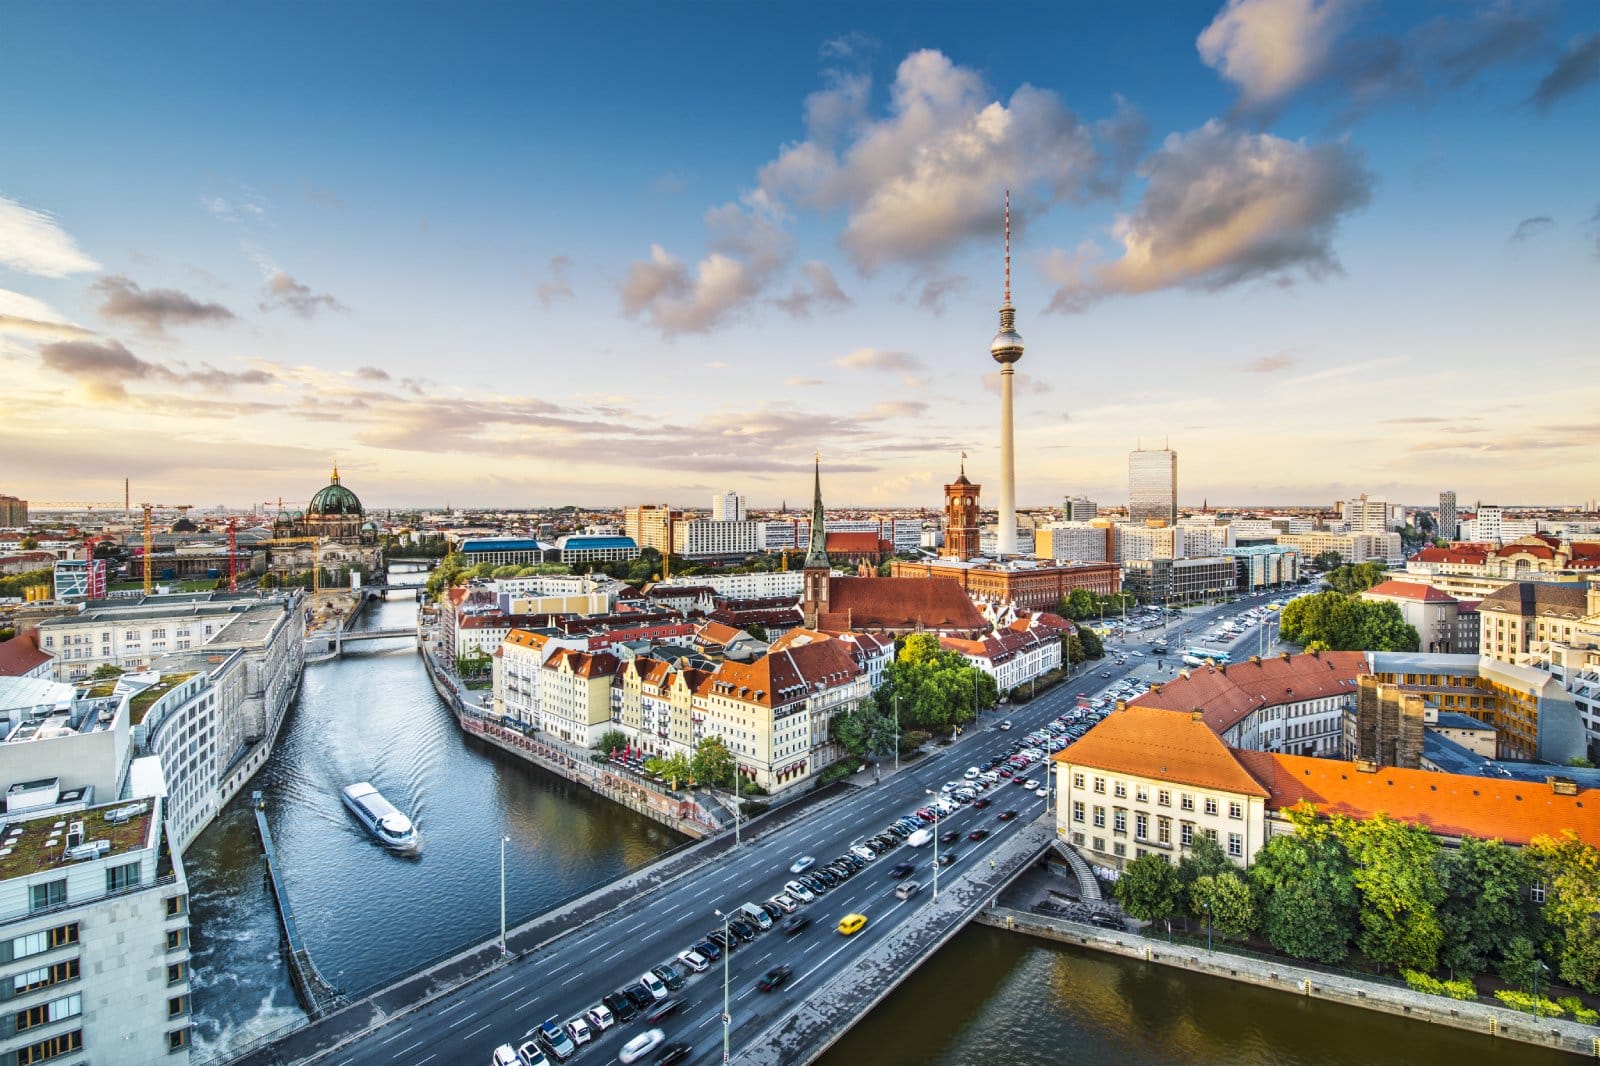 Image Credit: Shutterstock / Sean Pavone <p>Experience Berlin’s eclectic mix of history and modernity, with mornings spent jogging along the Berlin Wall Trail and afternoons browsing street art in the hip neighborhoods of Kreuzberg and Friedrichshain. Dive into the city’s thriving music scene, with visits to underground clubs, indie concerts, and open-air festivals celebrating electronic music and alternative culture.</p>